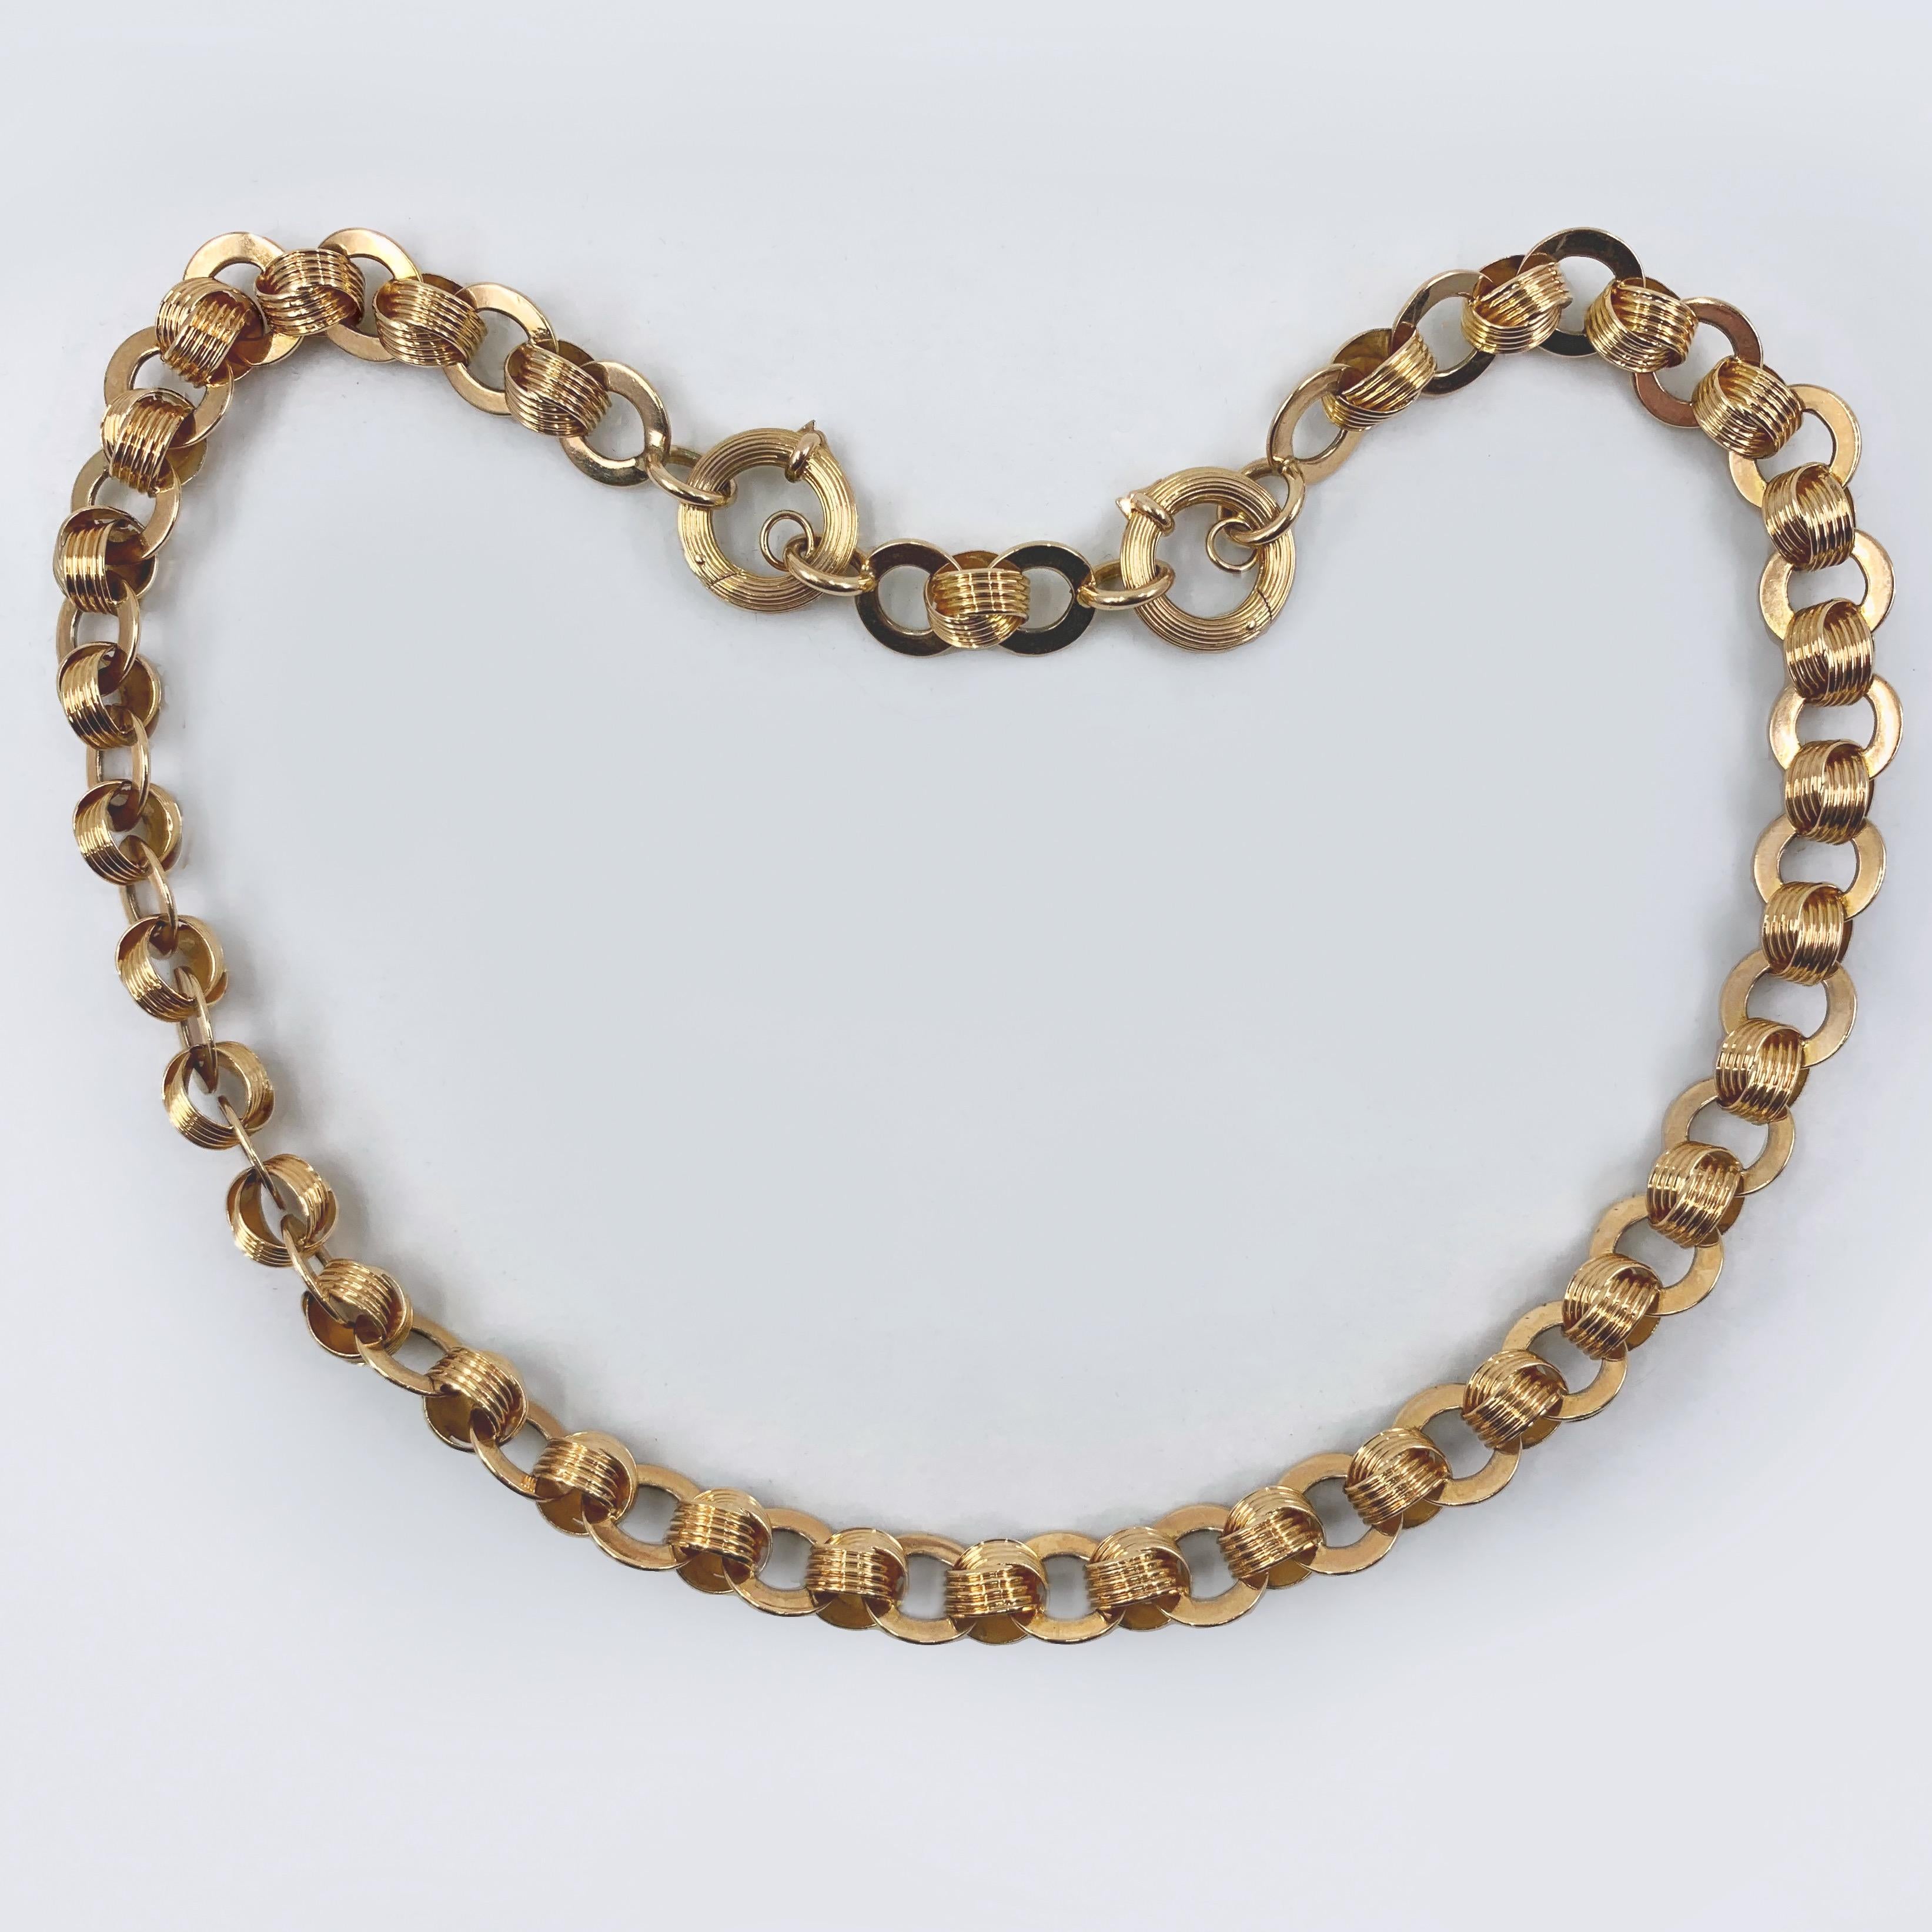 Art Deco Ring & Connector Chain in 18 Karat Gold with Detachable Extender Fob, circa 1920